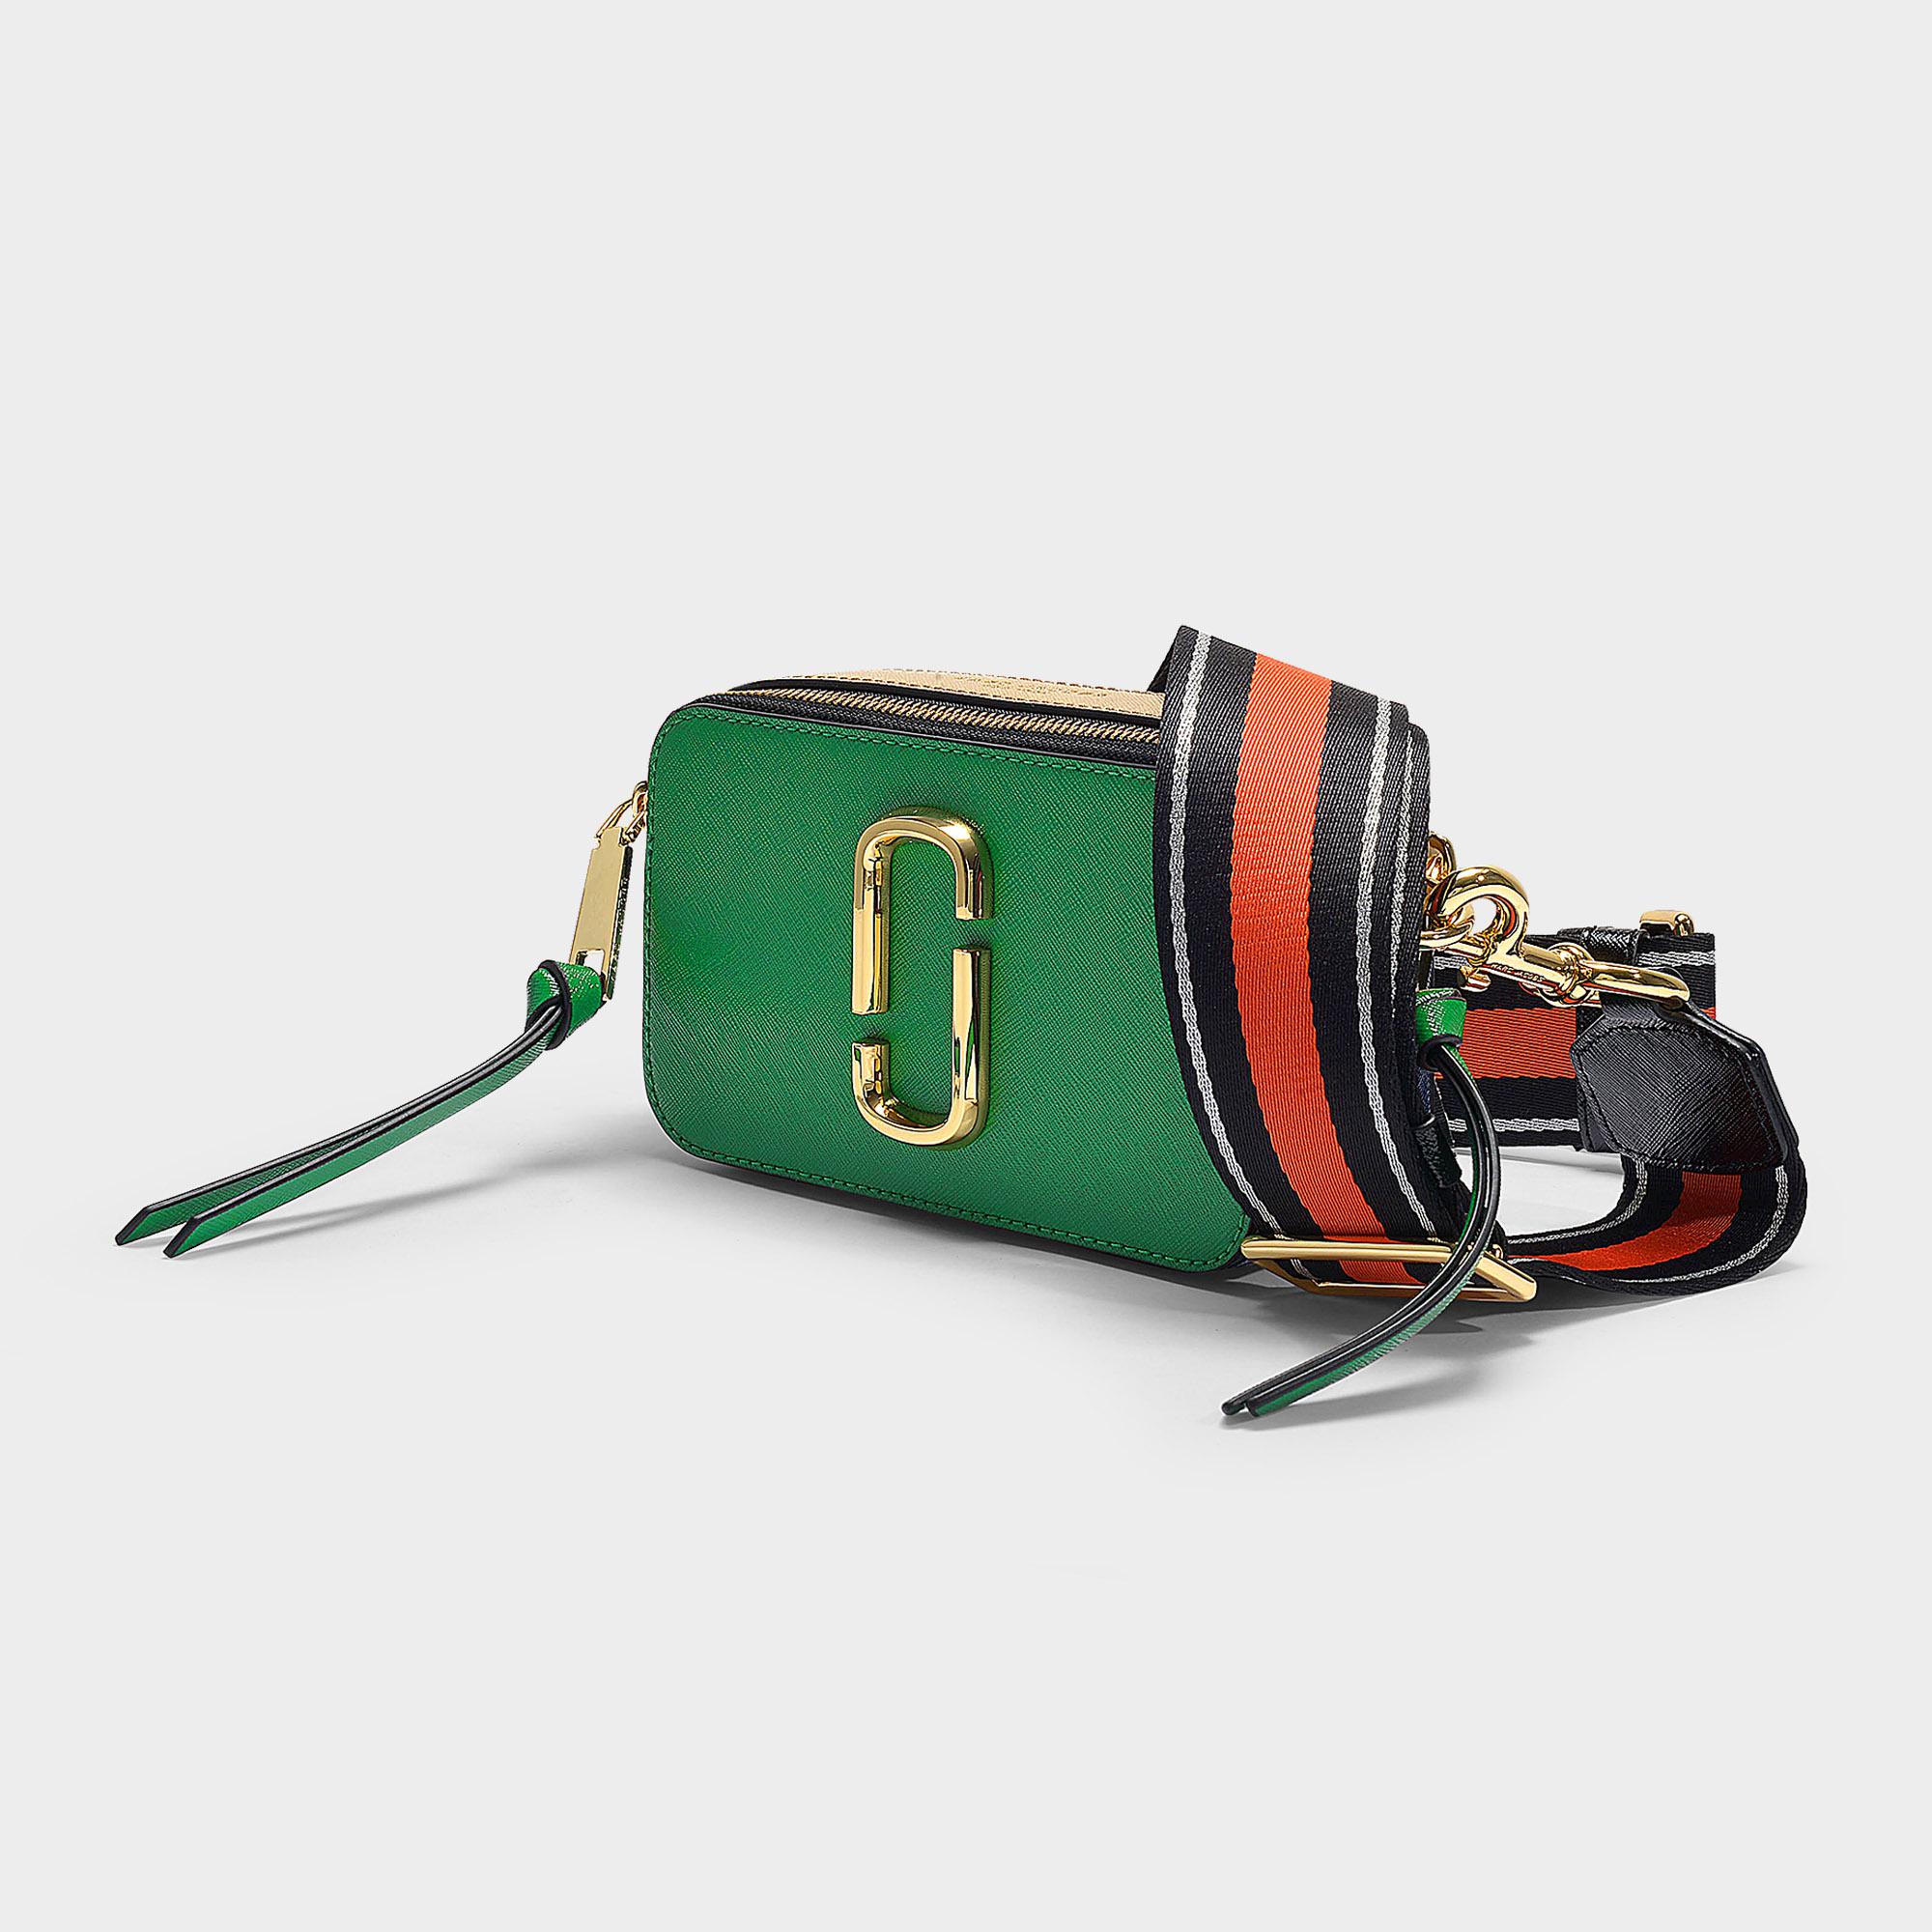 Marc Jacobs Pepper Leather Crossbody Bag in Green